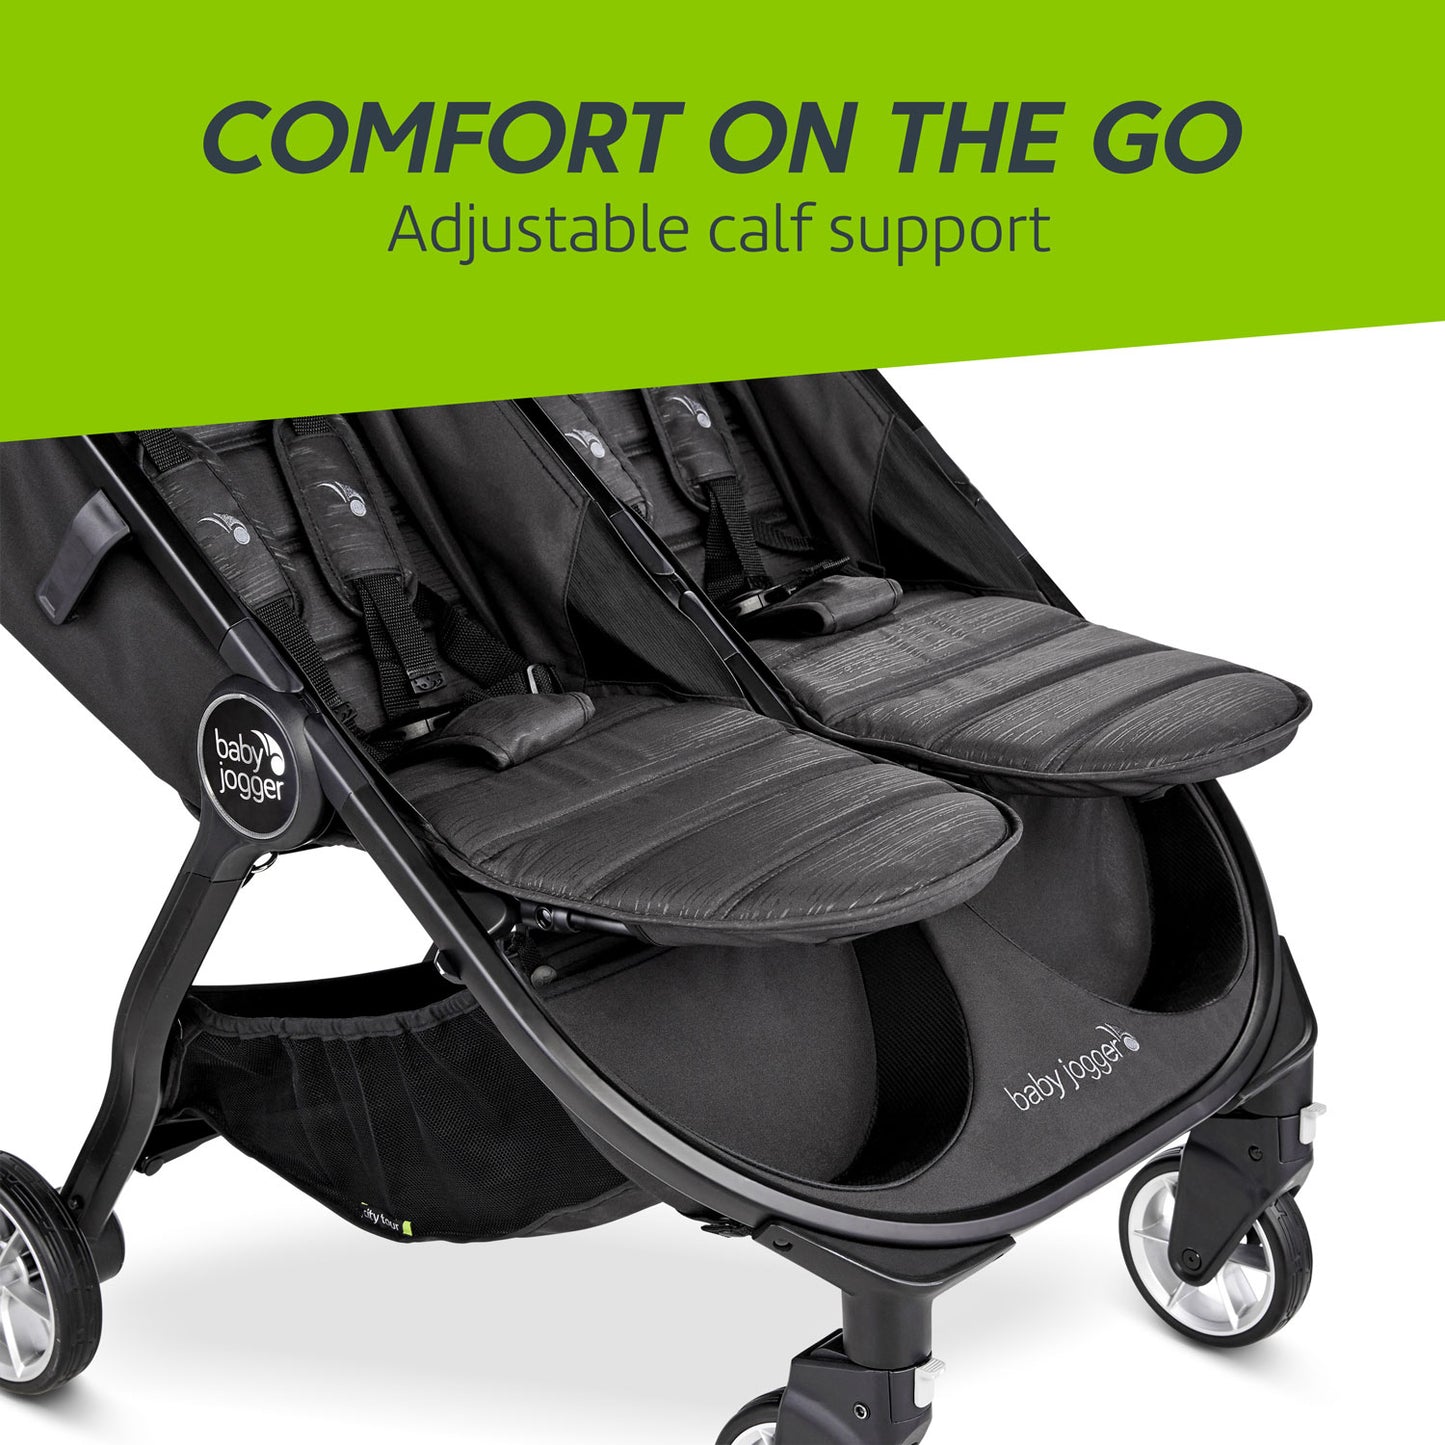 Baby Jogger City Tour 2 Double Stroller adjustable calf support